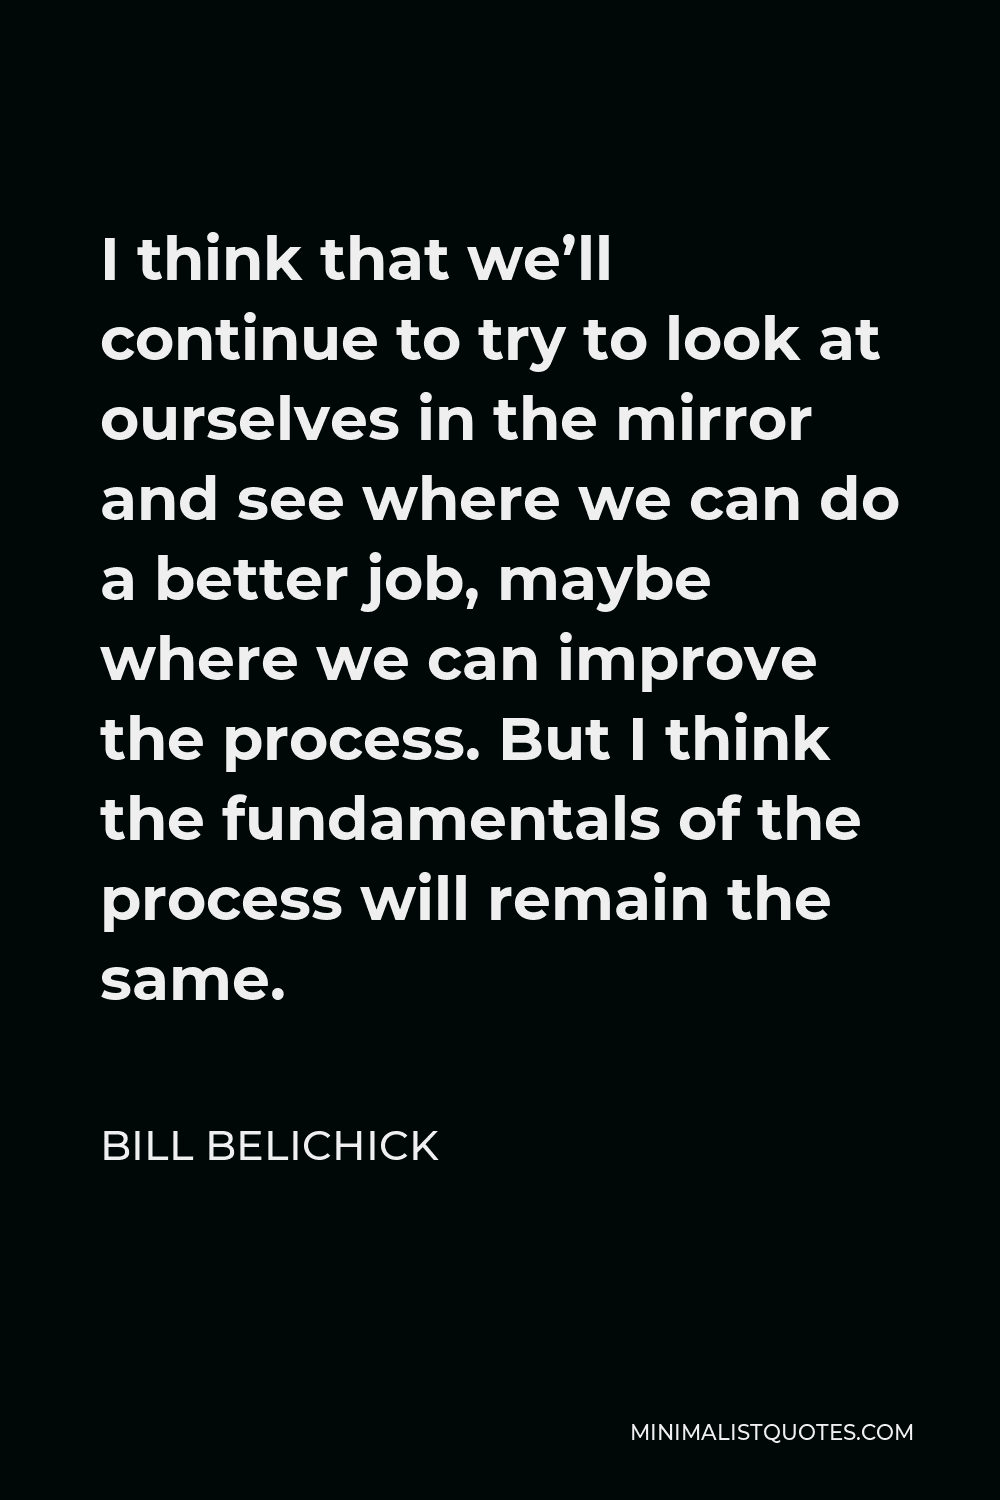 Bill Belichick Quote - I think that we’ll continue to try to look at ourselves in the mirror and see where we can do a better job, maybe where we can improve the process. But I think the fundamentals of the process will remain the same.